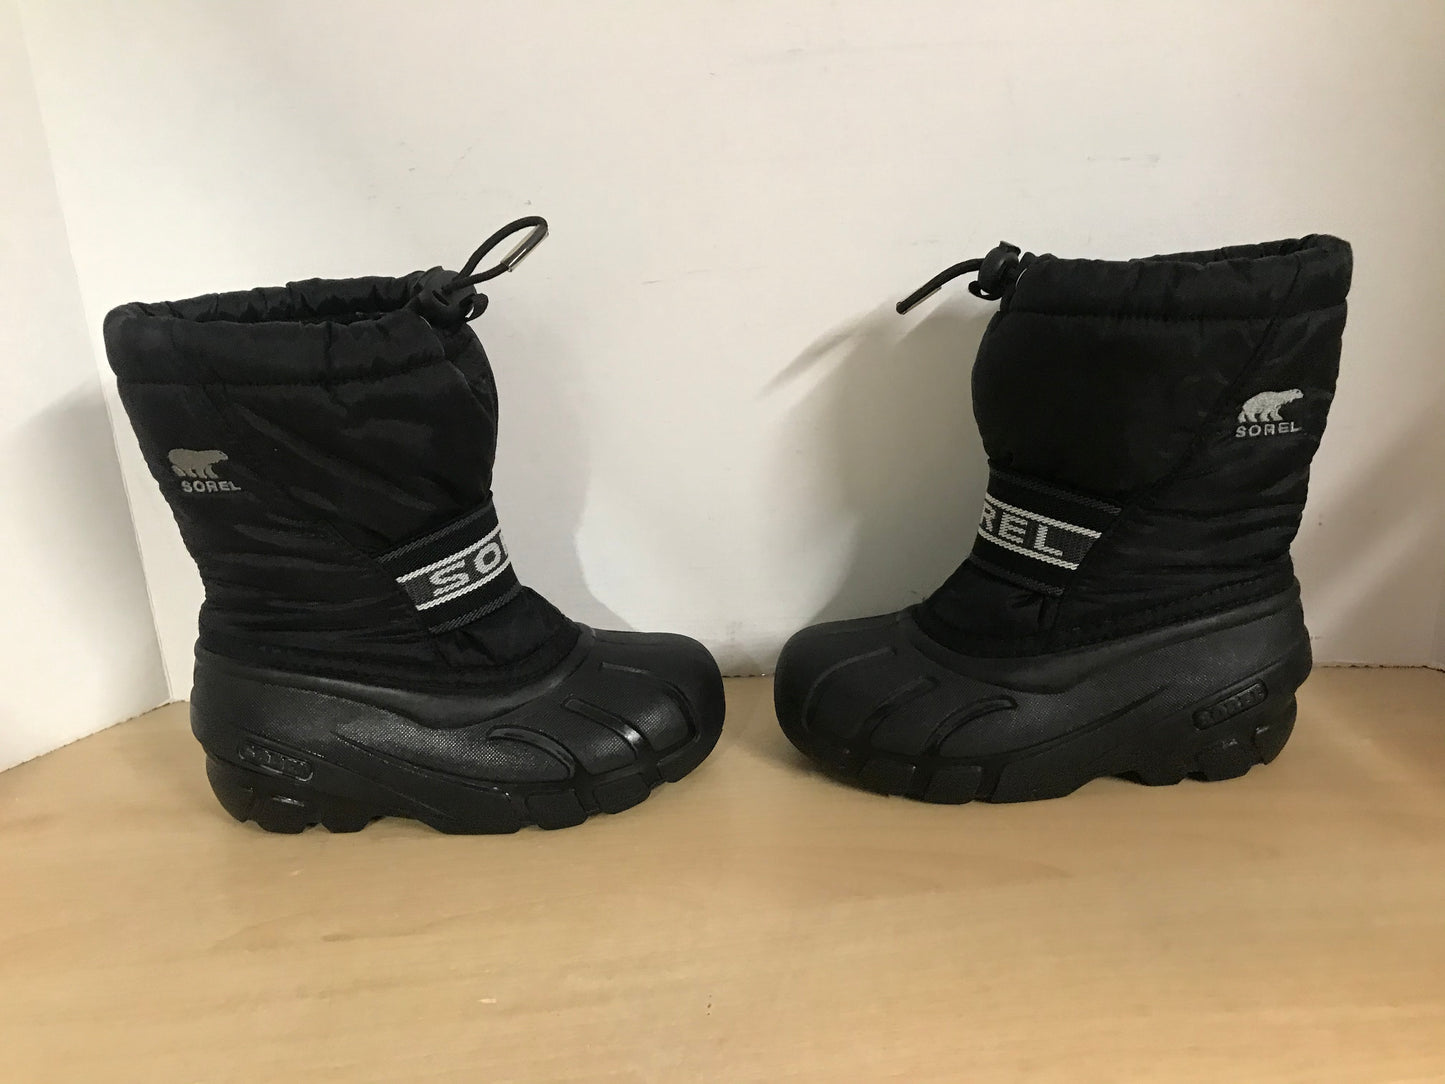 Winter Boots Child Size 12 Sorel Black With Liner